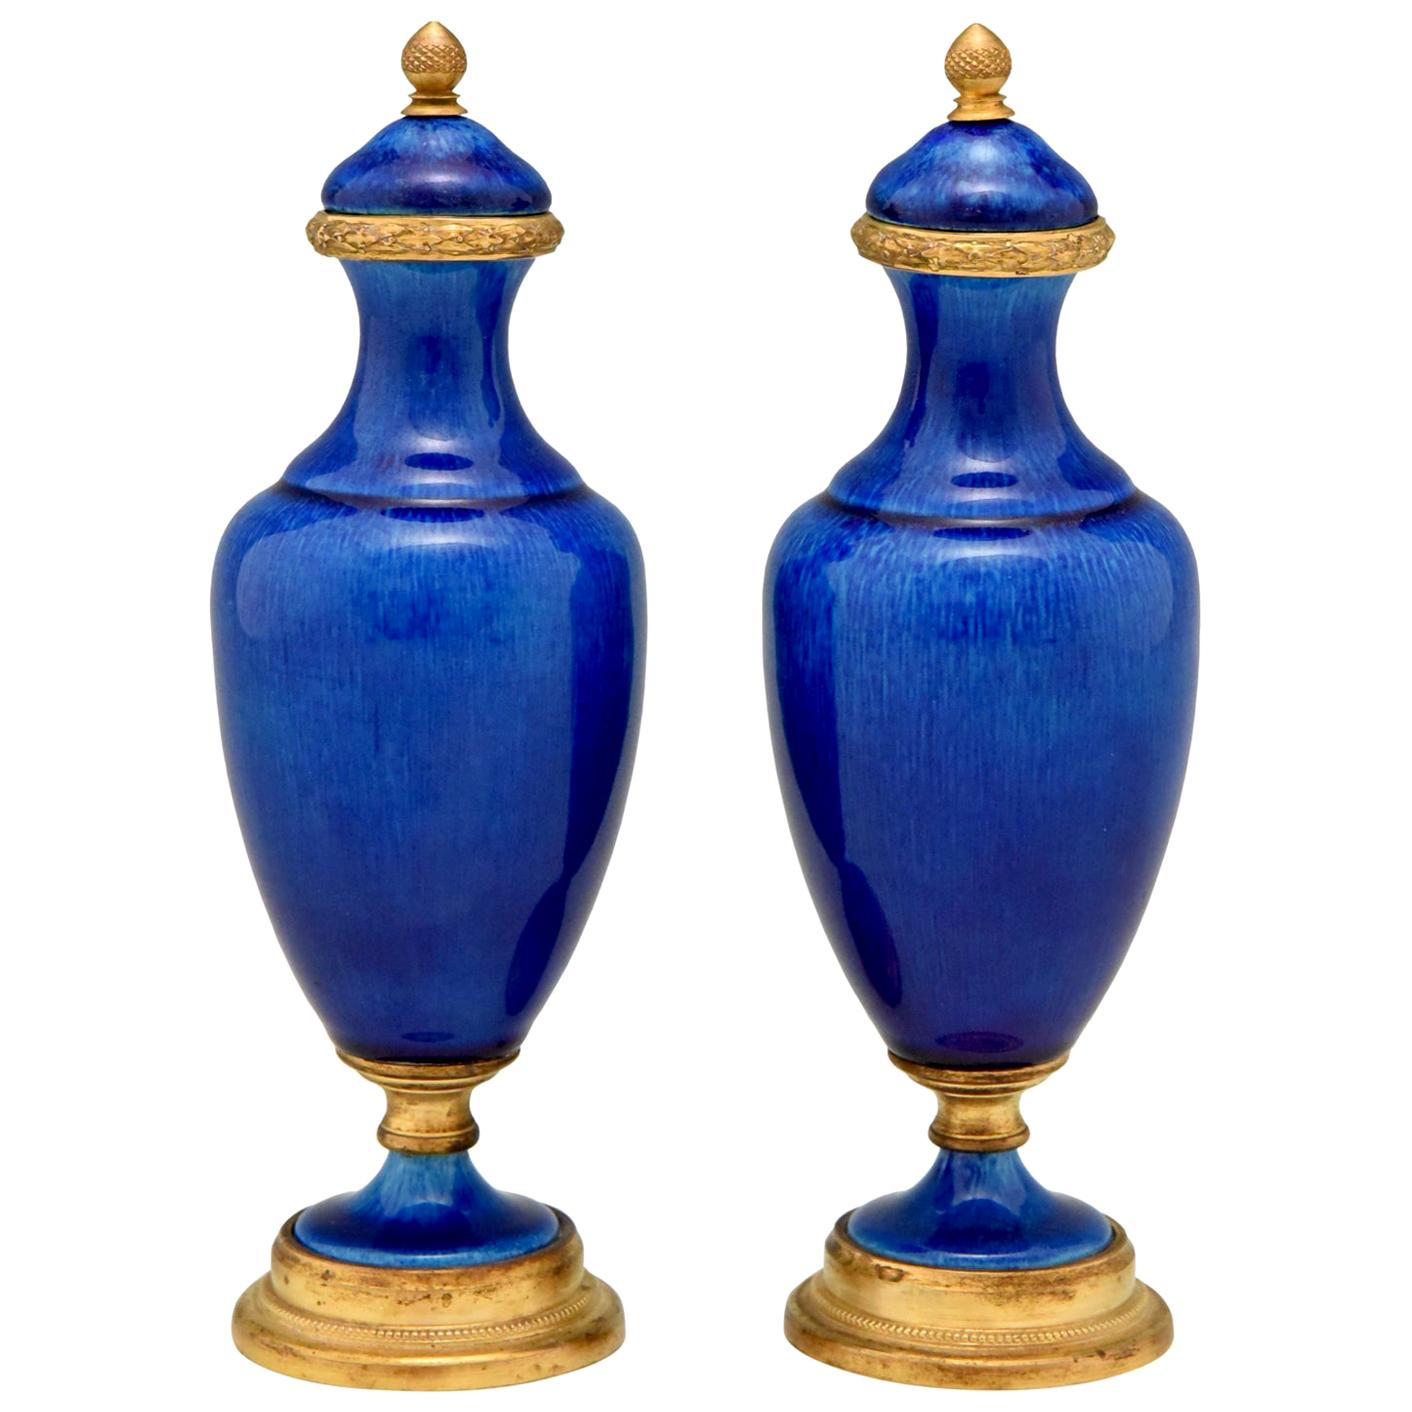 Pair of Blue Ceramic and Bronze Vases or Urns Paul Milet for Sèvres ...